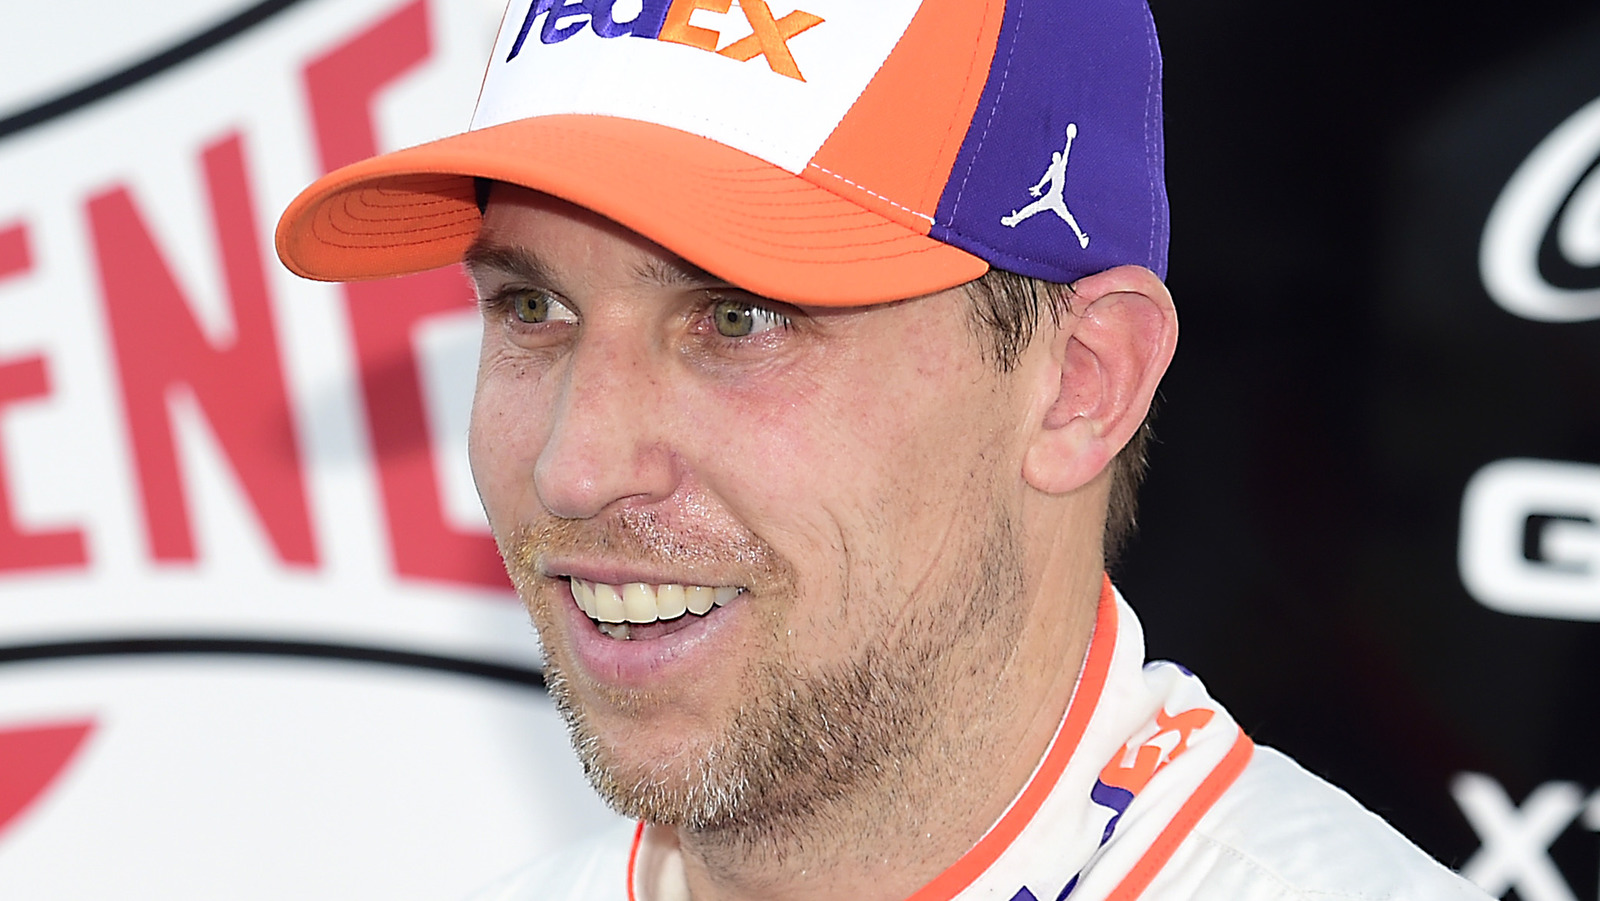 The Truth About Jordan Fish, The Mother Of Denny Hamlin's Children